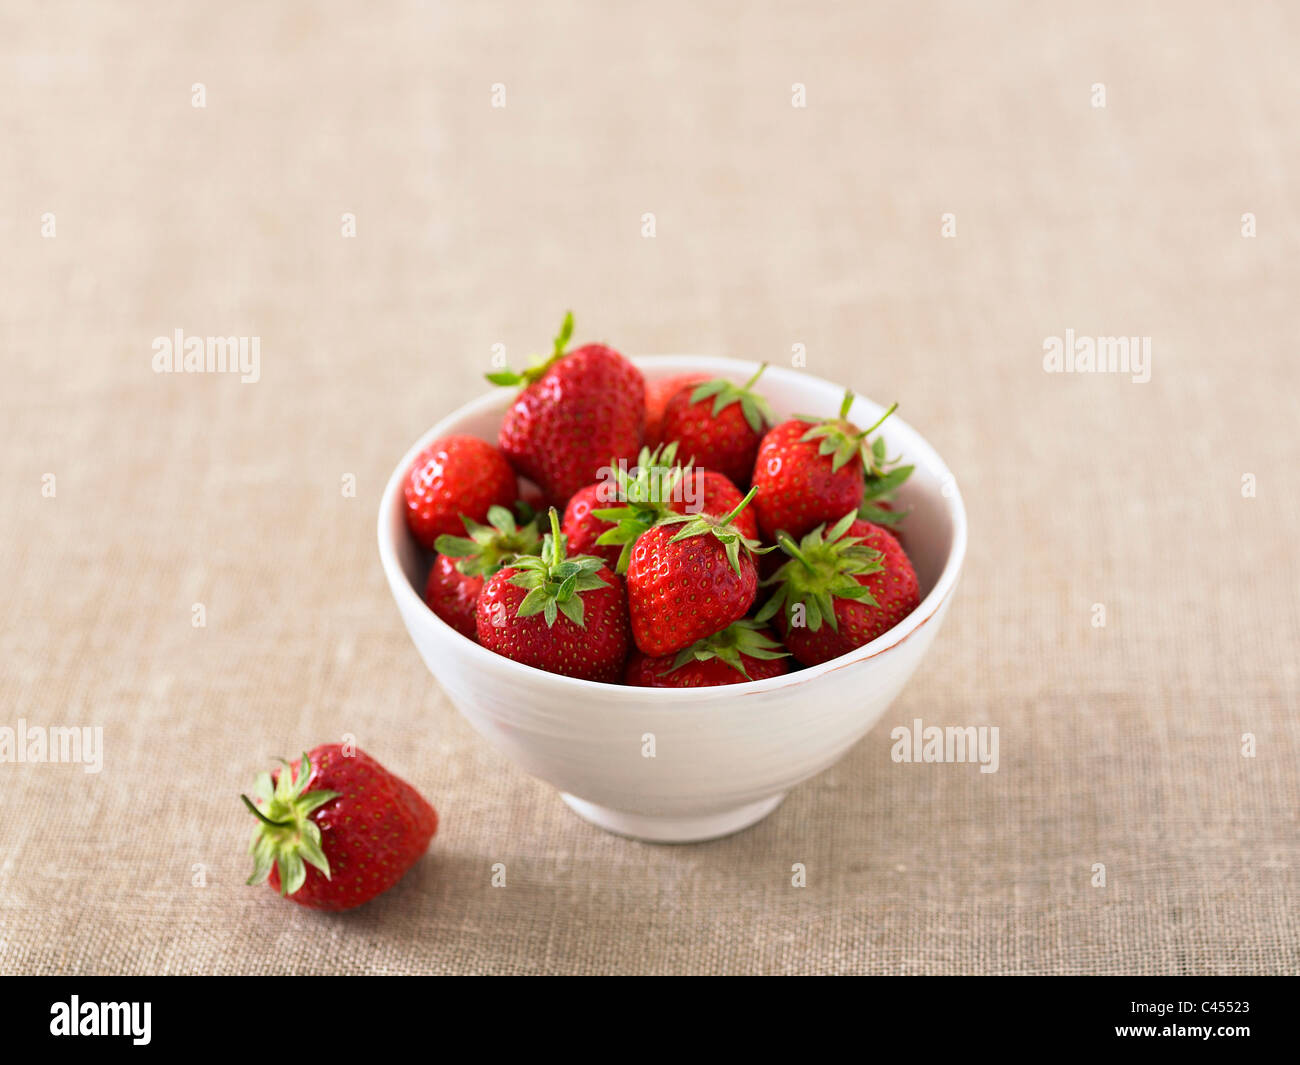 Bowl of strawberries, close-up Stock Photo